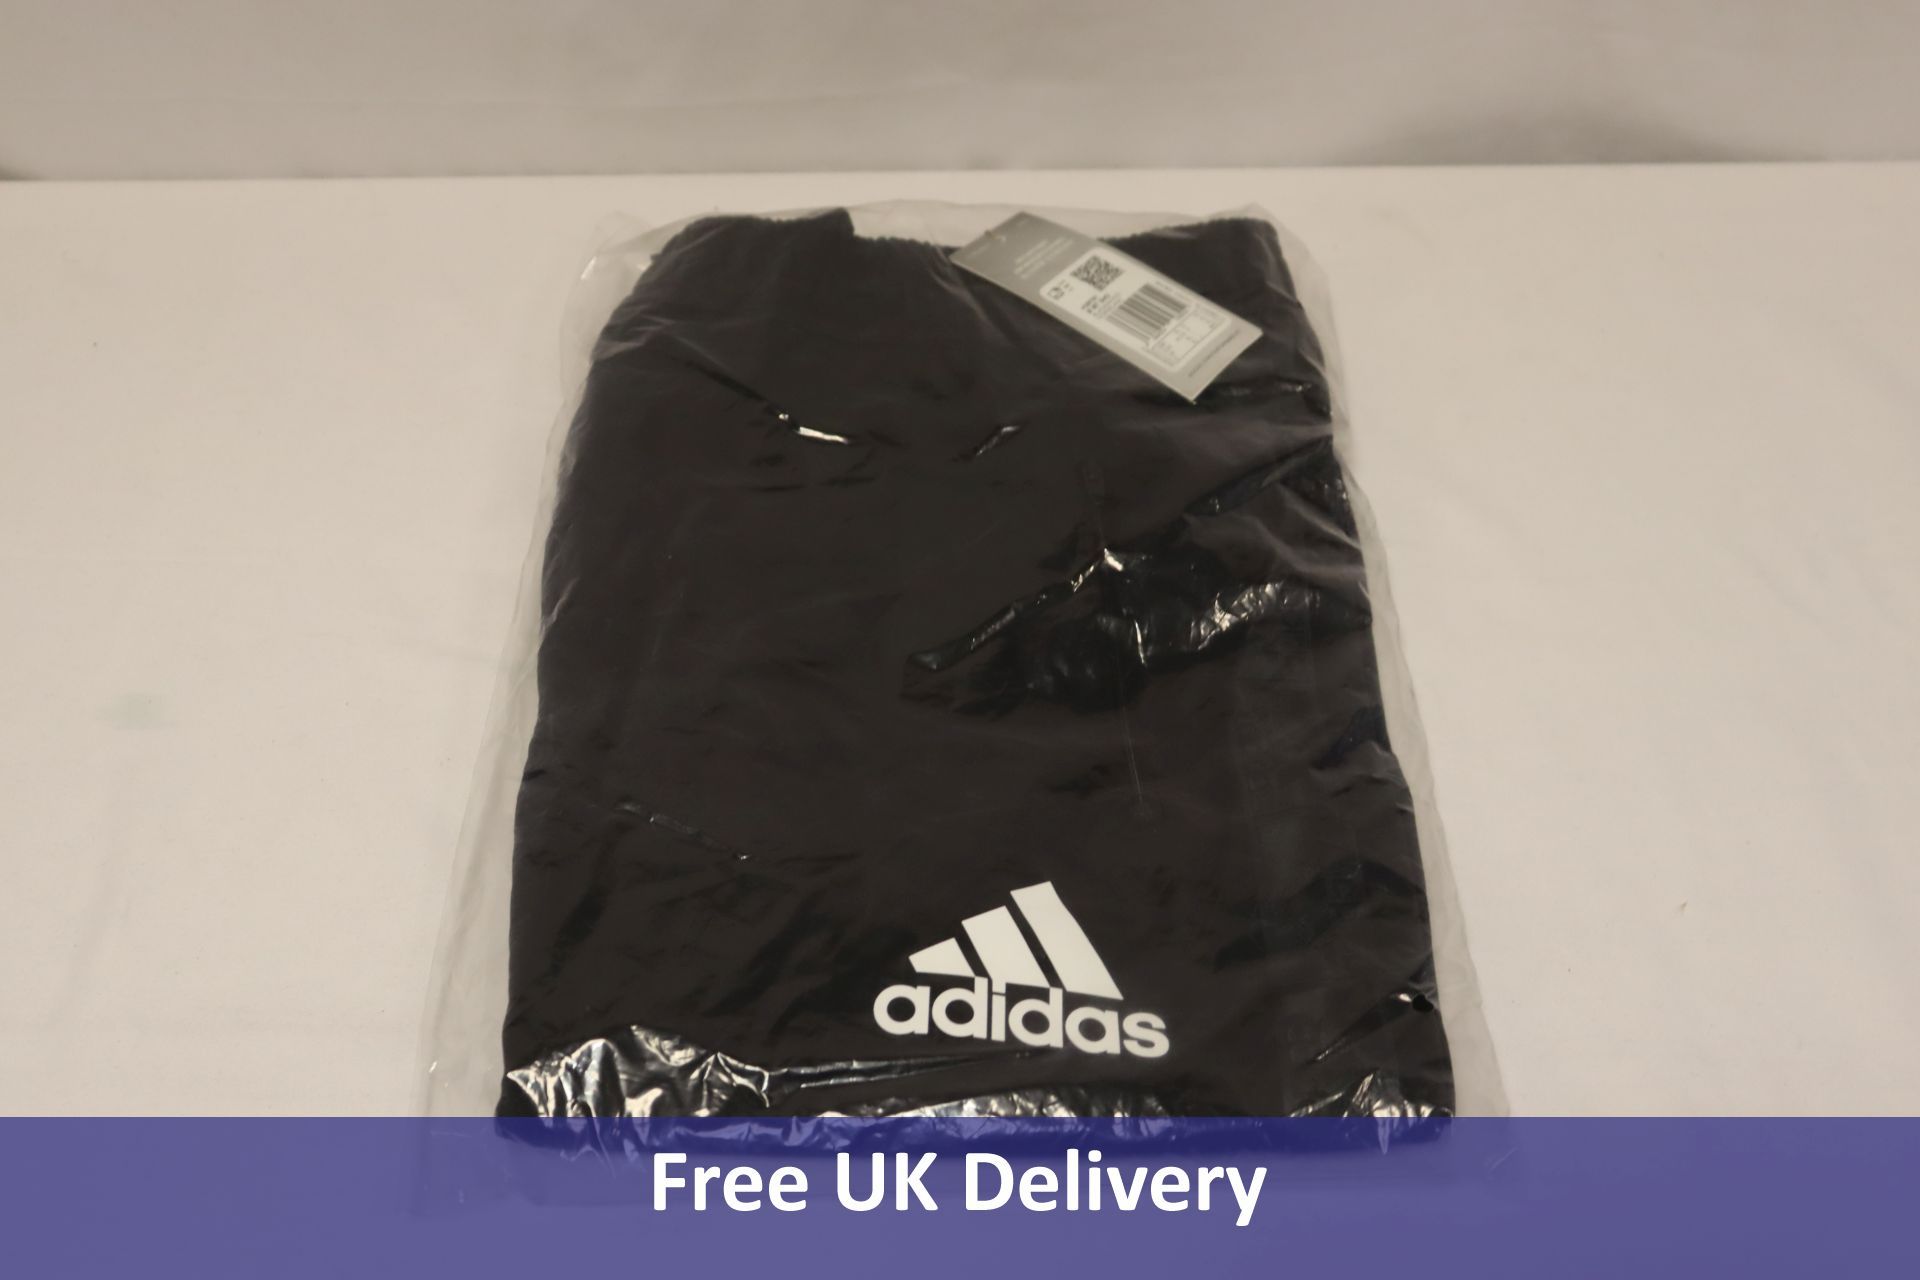 Three Adidas items to include 1x Aeroready Shorts, Black, Extra Large, 2x Essentials High Waisted Le